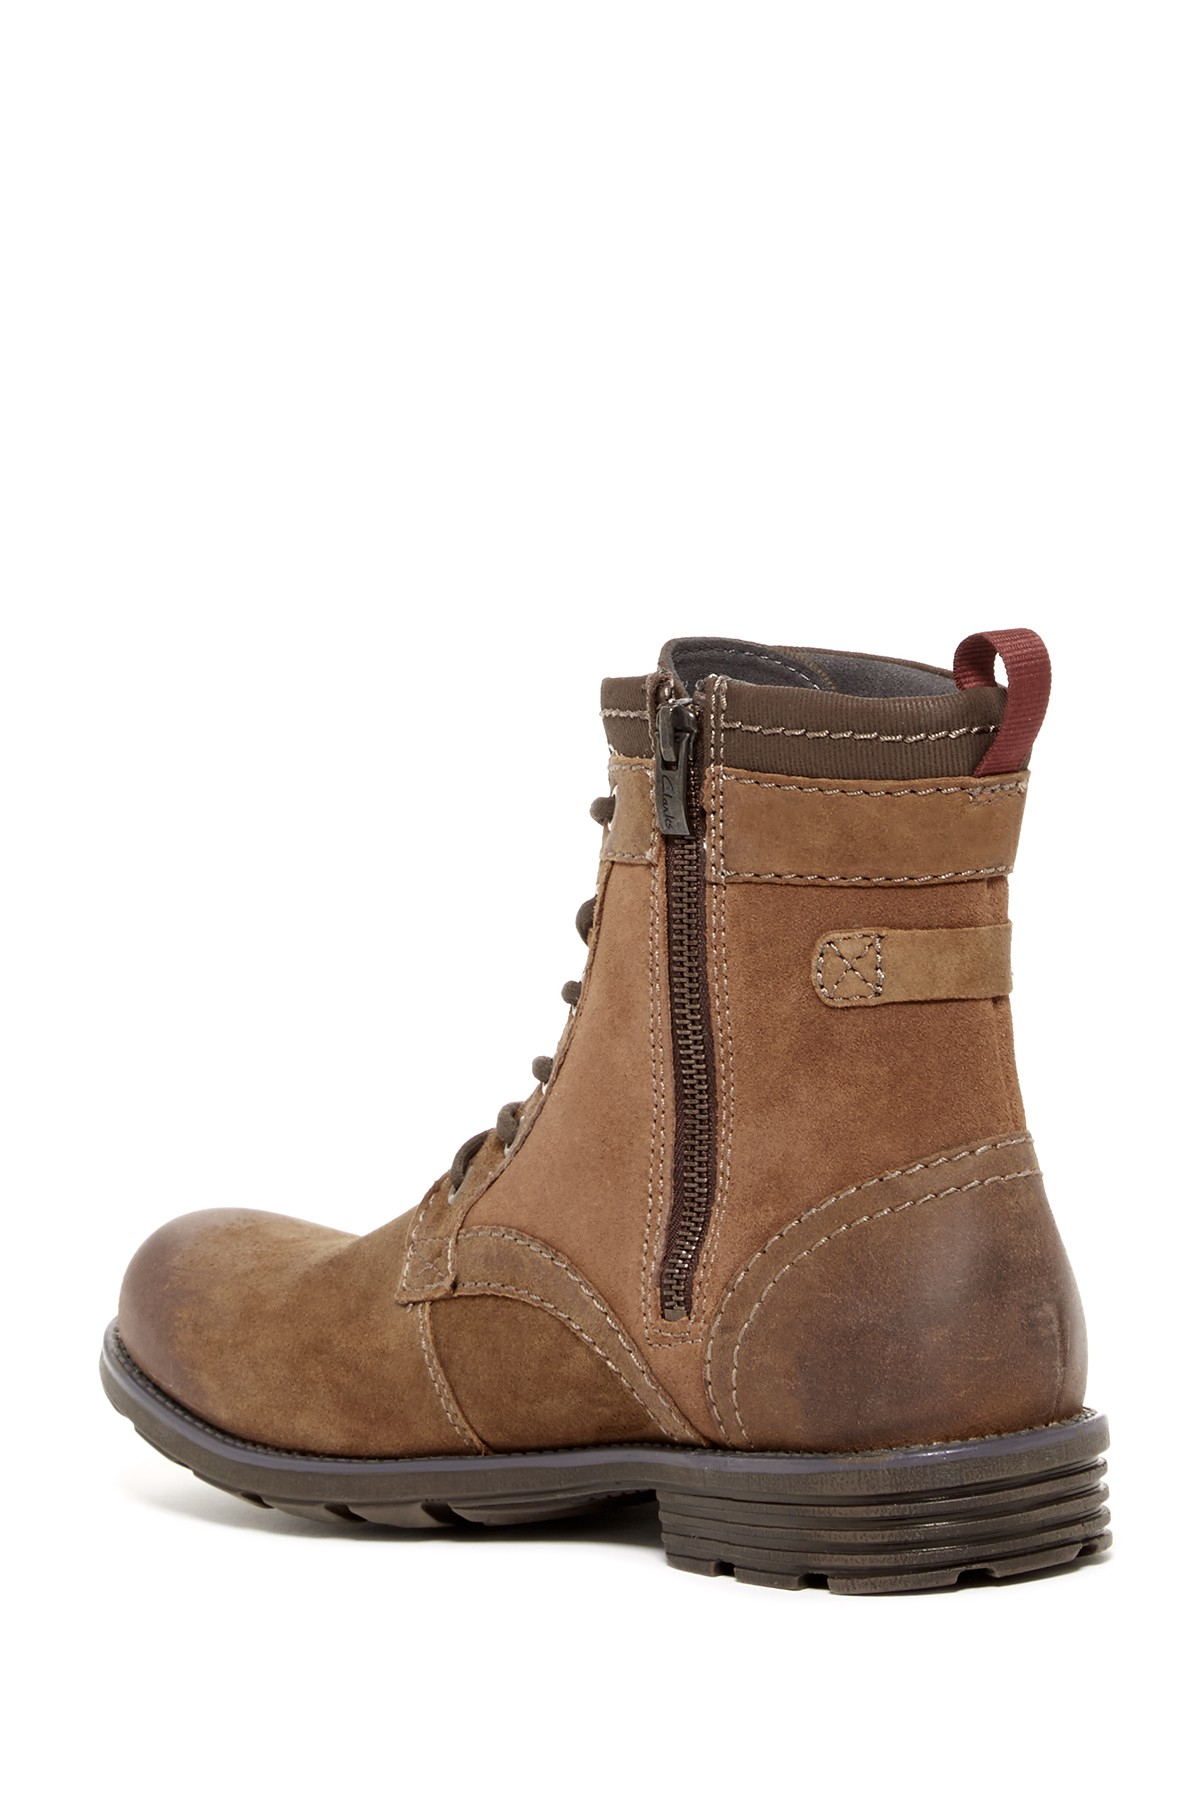 Clarks Leather Darian Hi Lace-up Boot 